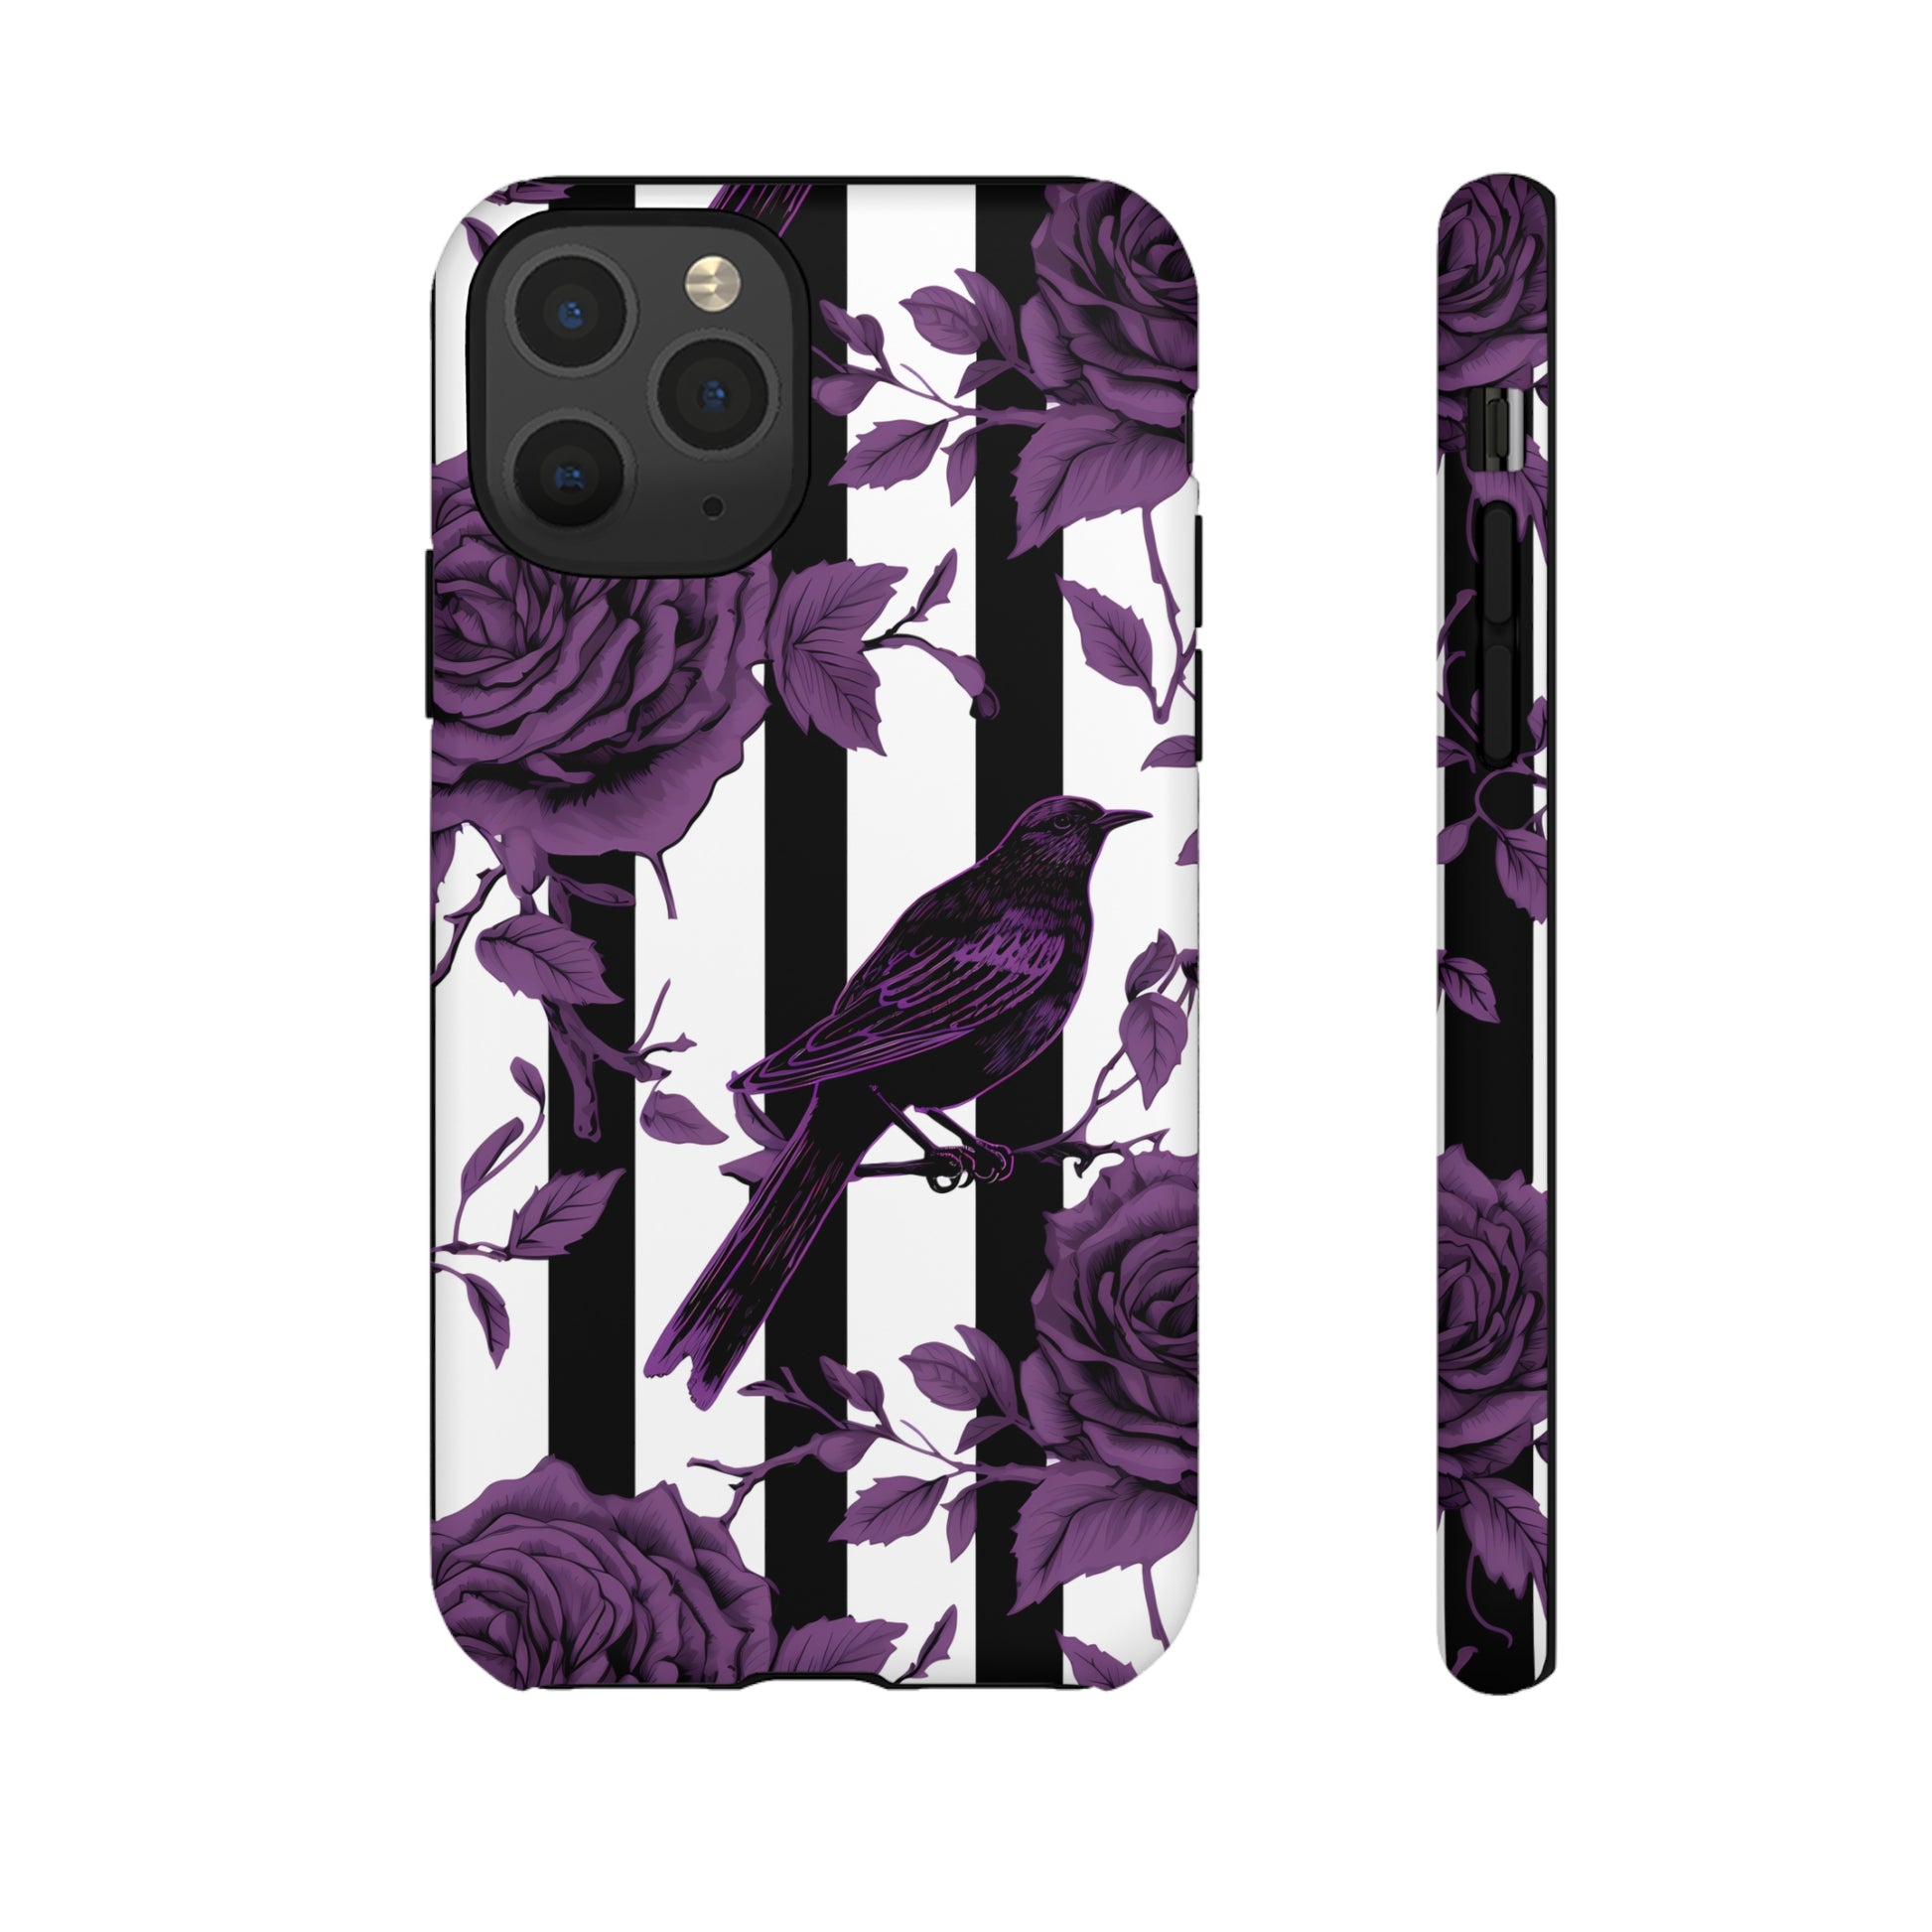 Striped Crows and Roses Tough Cases for iPhone Samsung Google PhonesPhone CaseVTZdesignsiPhone 11 ProMatteAccessoriescrowsGlossy